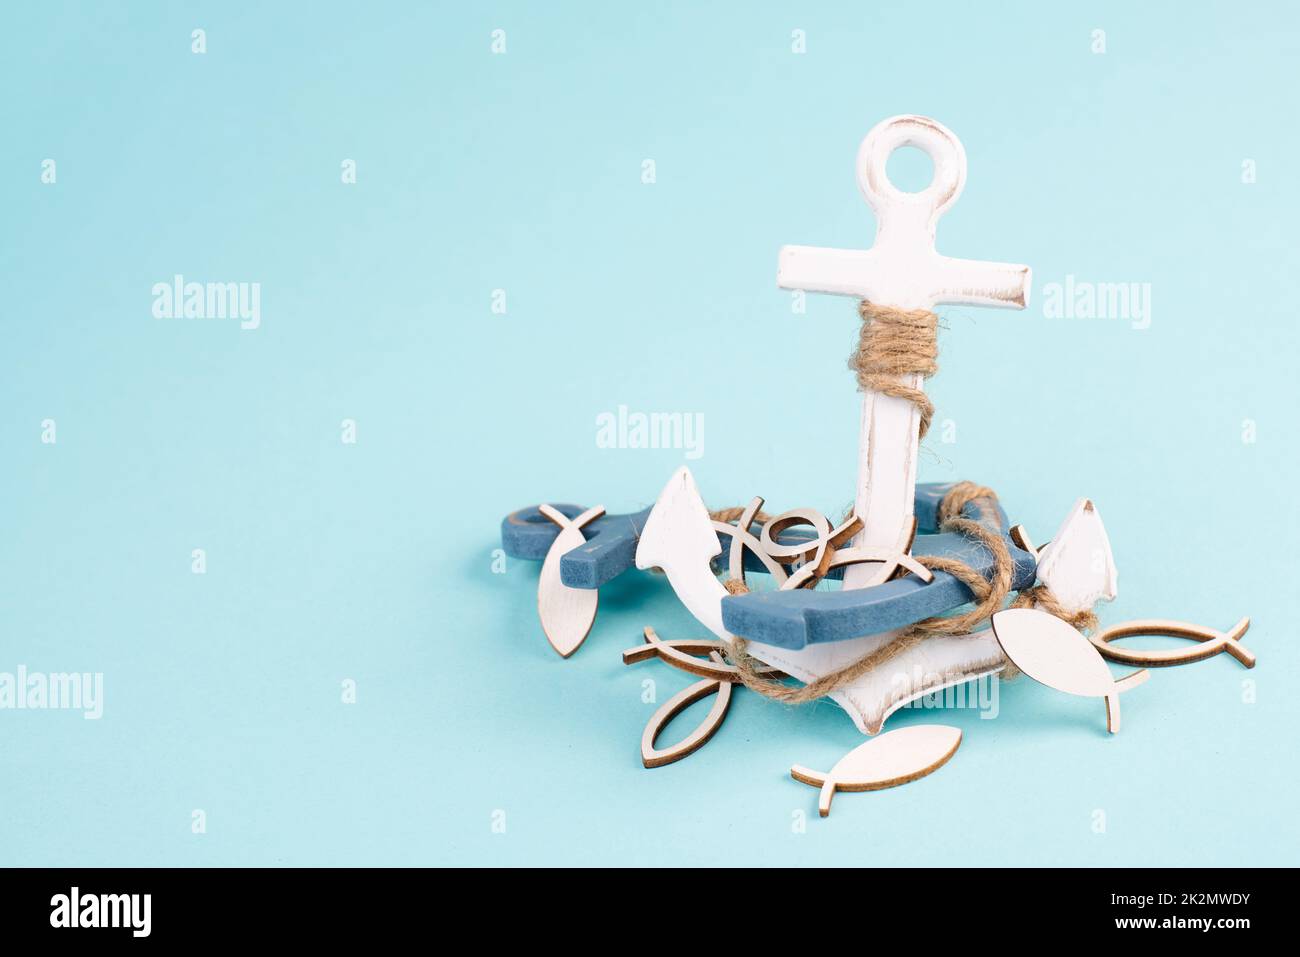 White anchor and fish on a blue background, maritime sea life, sailing trip, summer vacation, tourism concept, harbor Stock Photo